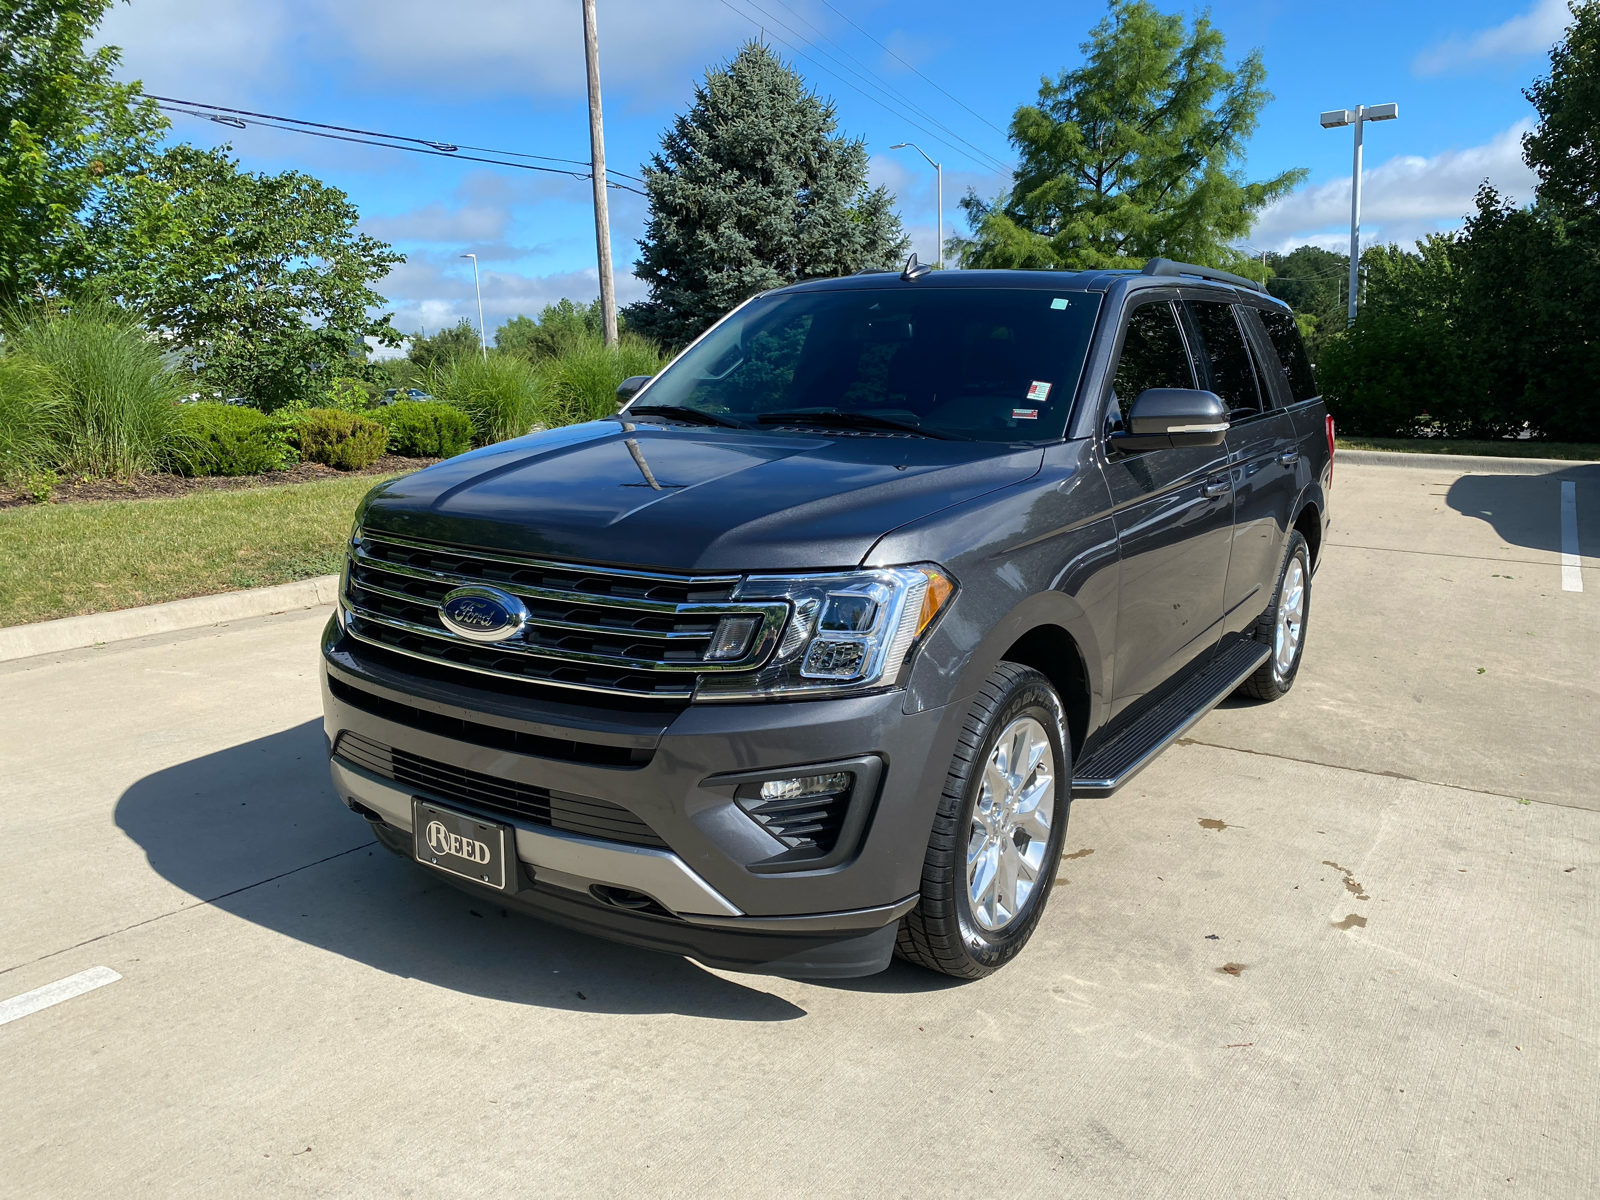 2020 Ford Expedition XLT 2